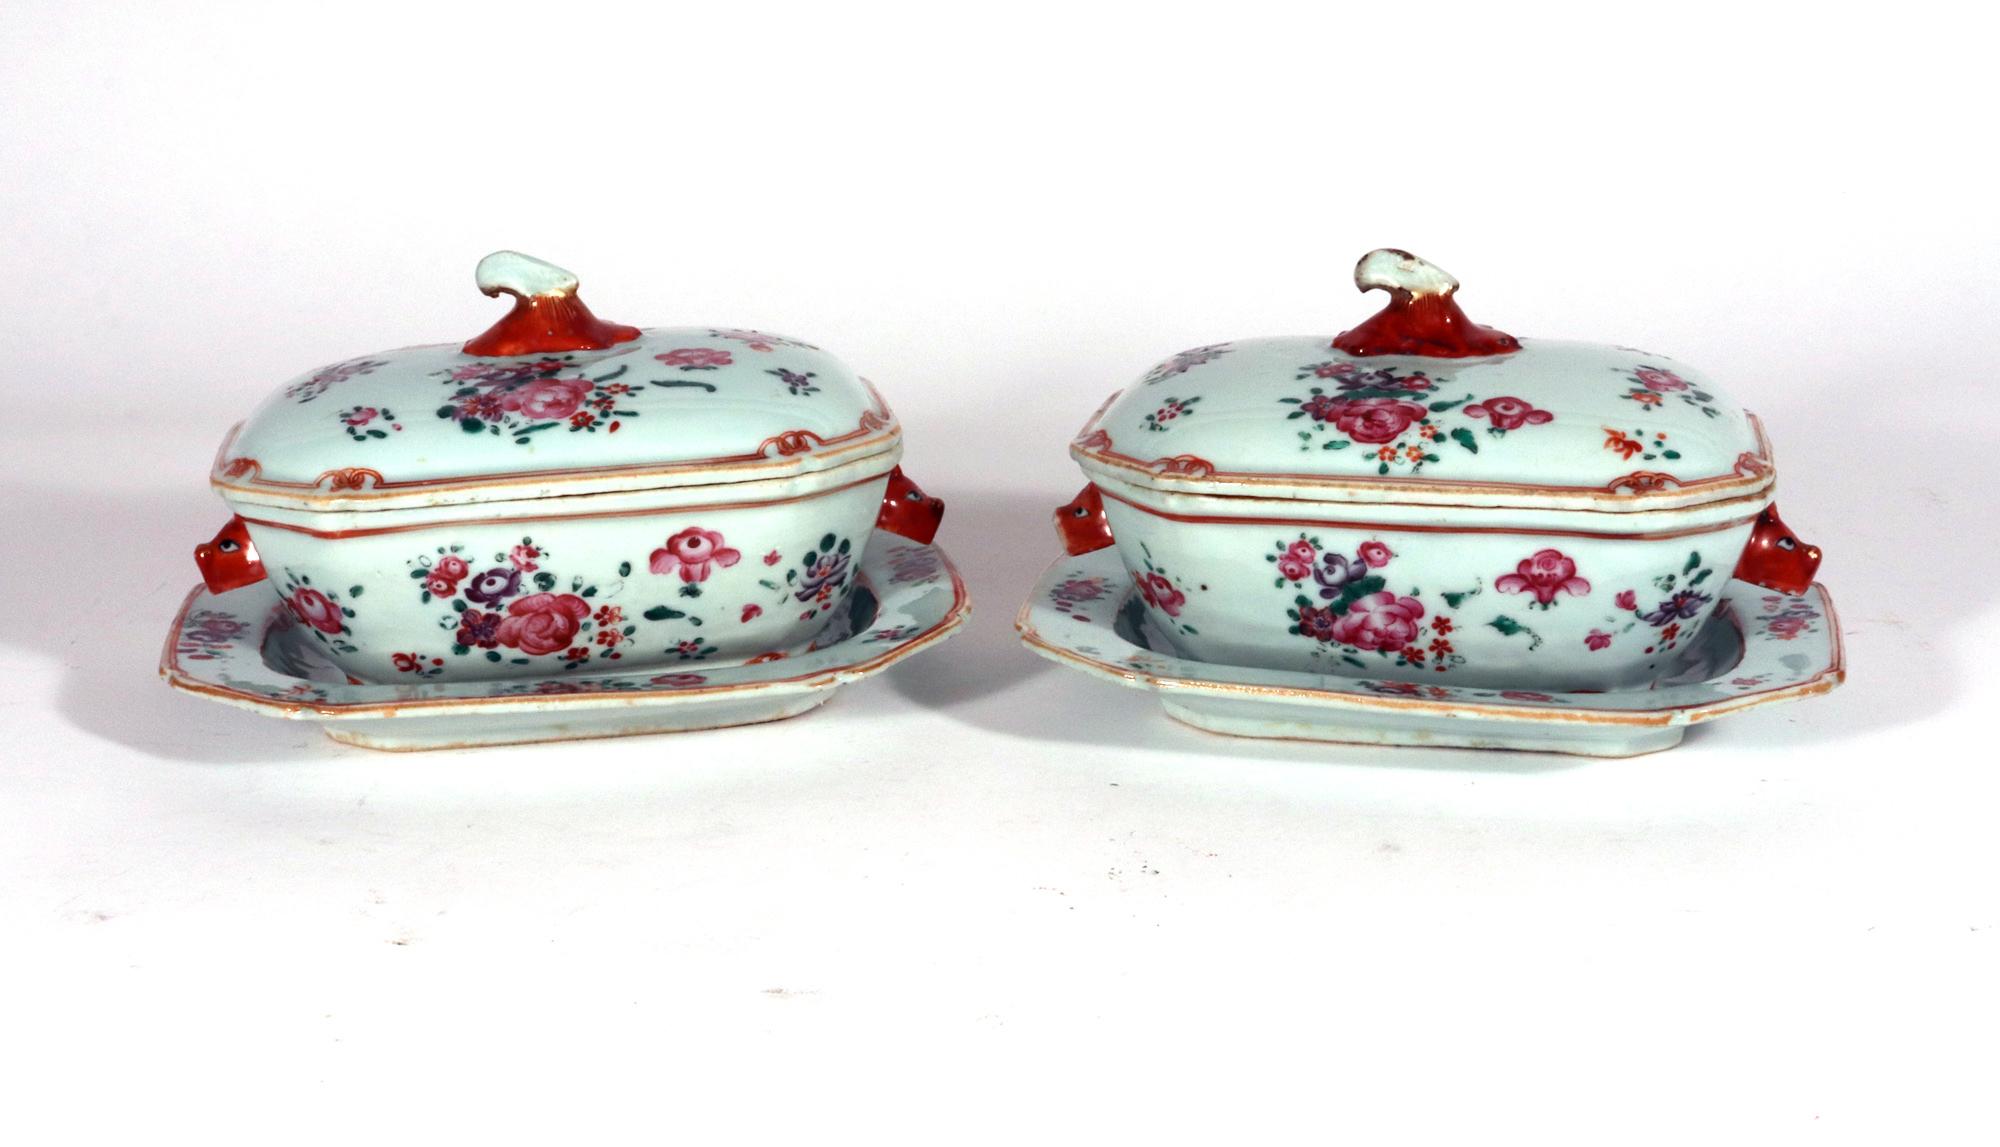 Chinese Export Porcelain Famille Rose Sauce Tureens, Covers & Stands For Sale 4